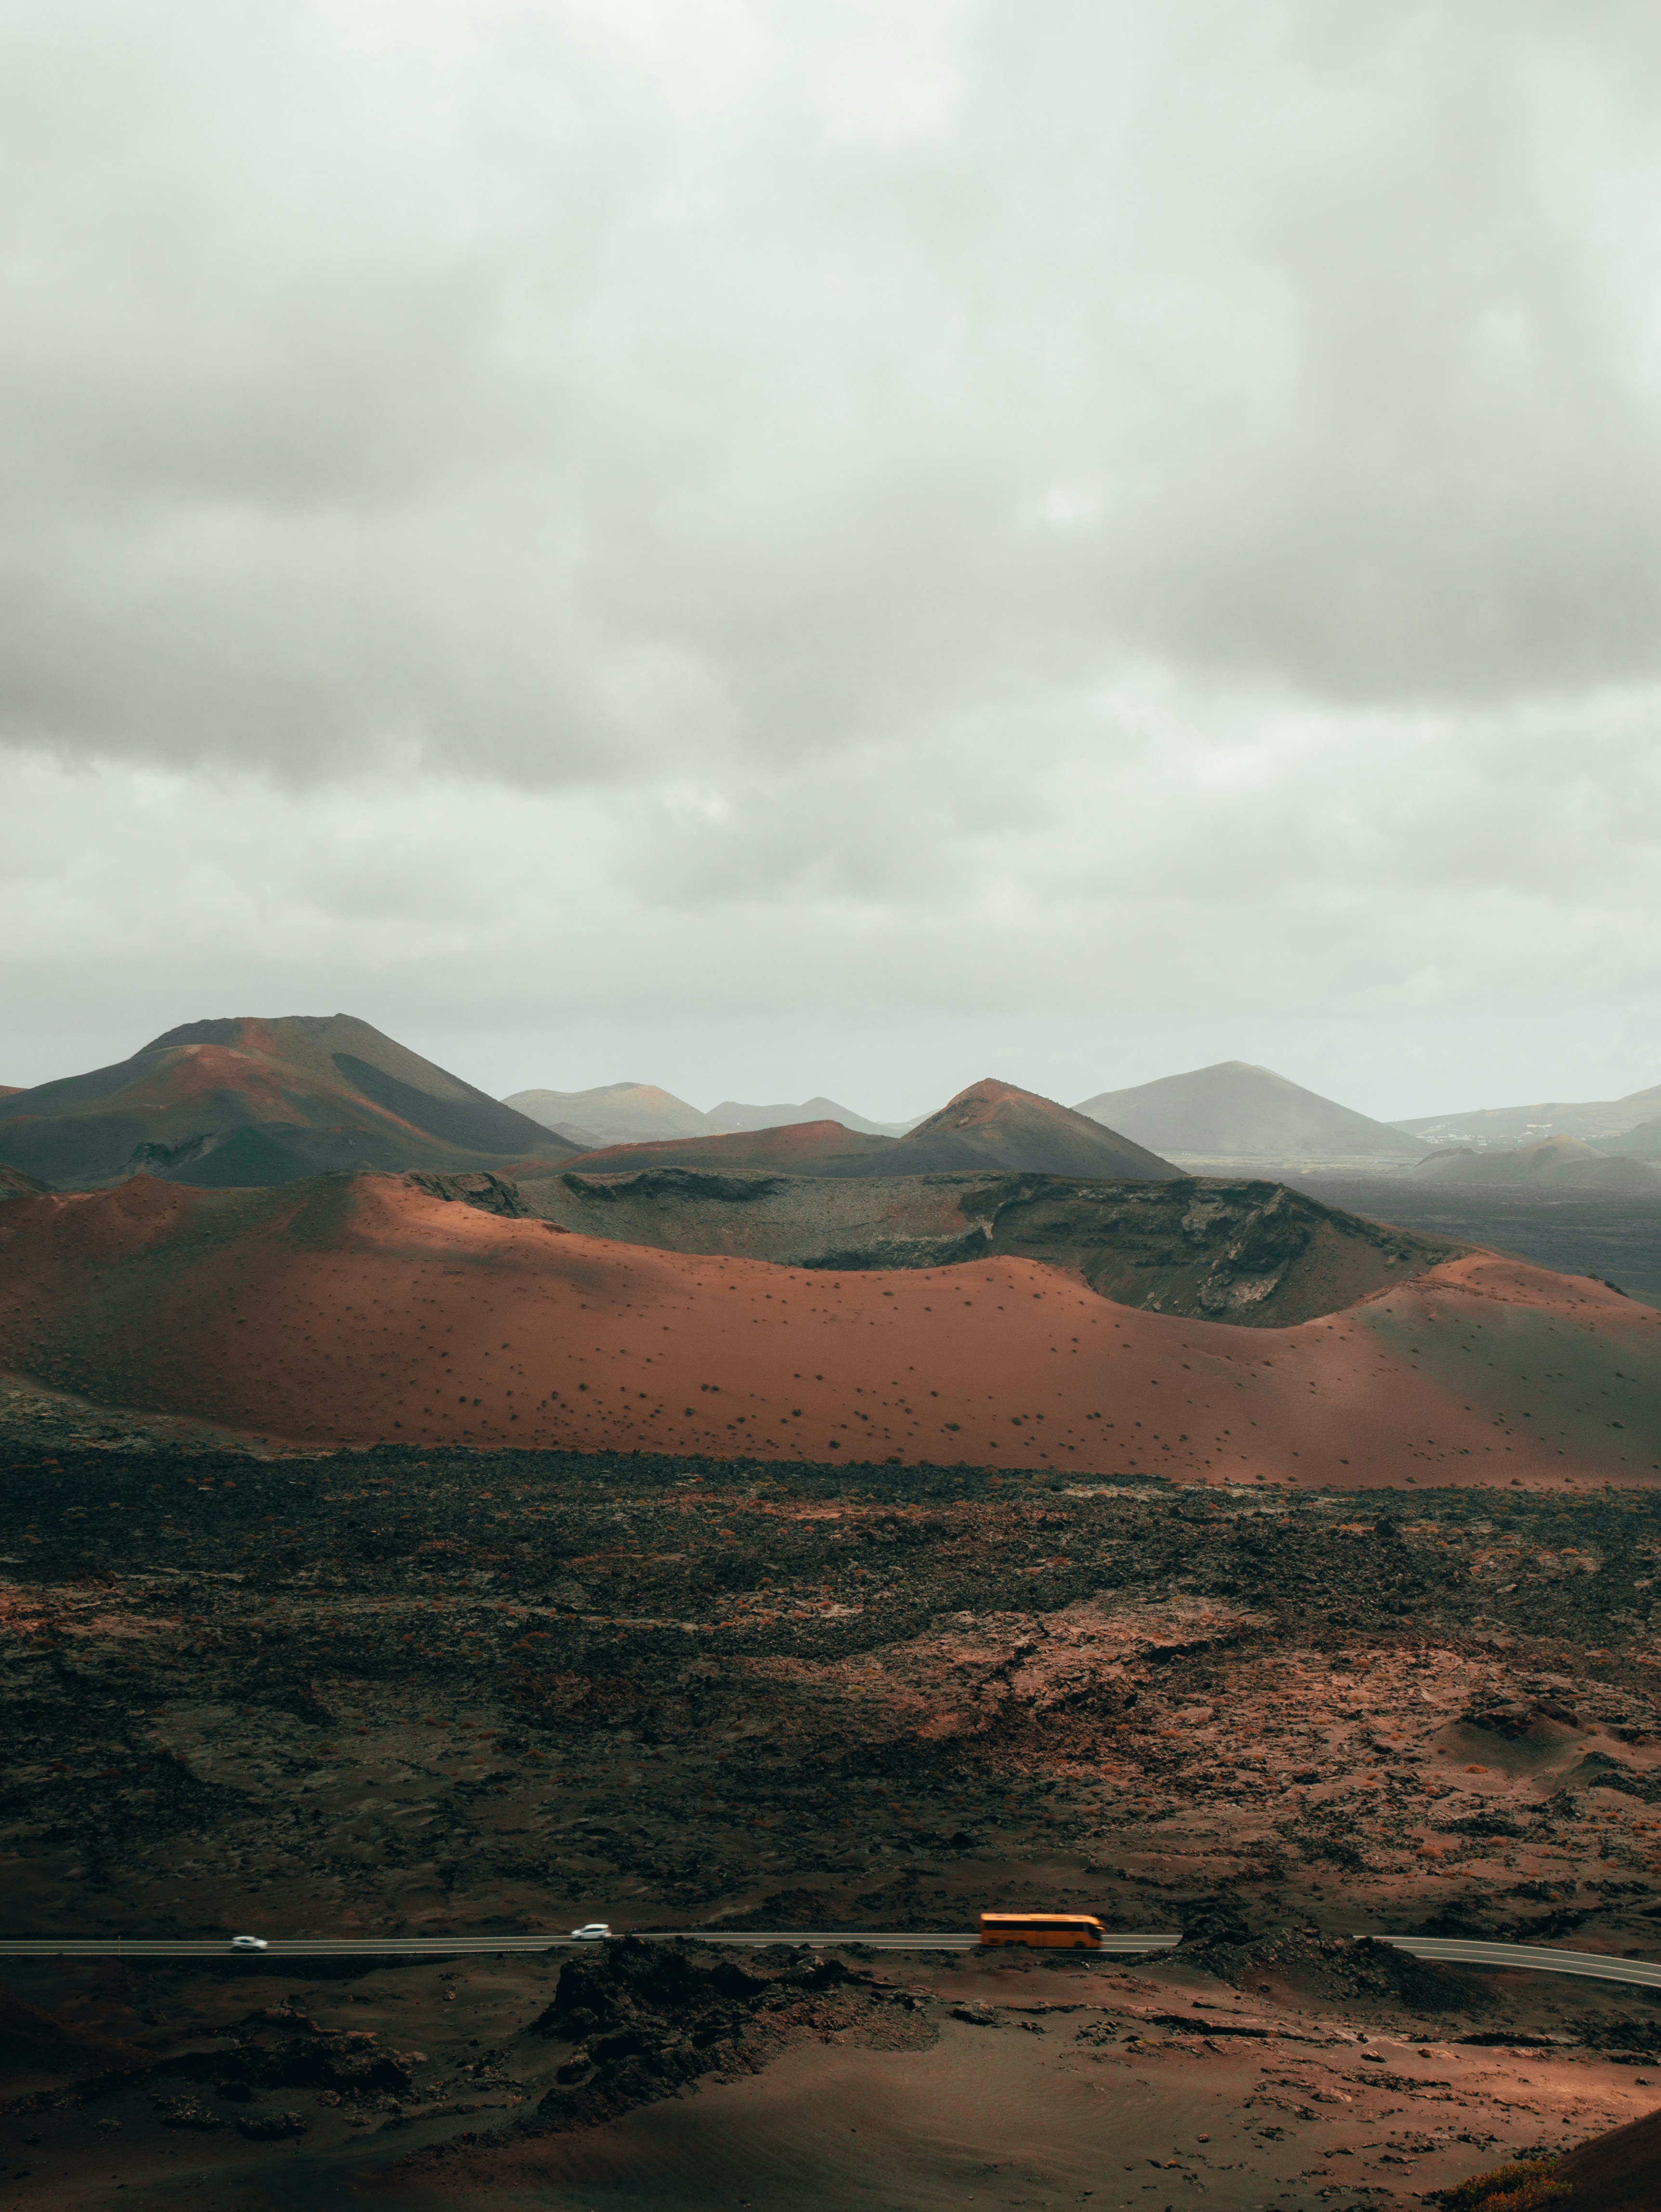 This photo was taken on a trip to Lanzarote, Spain, a land carved over the Atlantic on fire and lava.